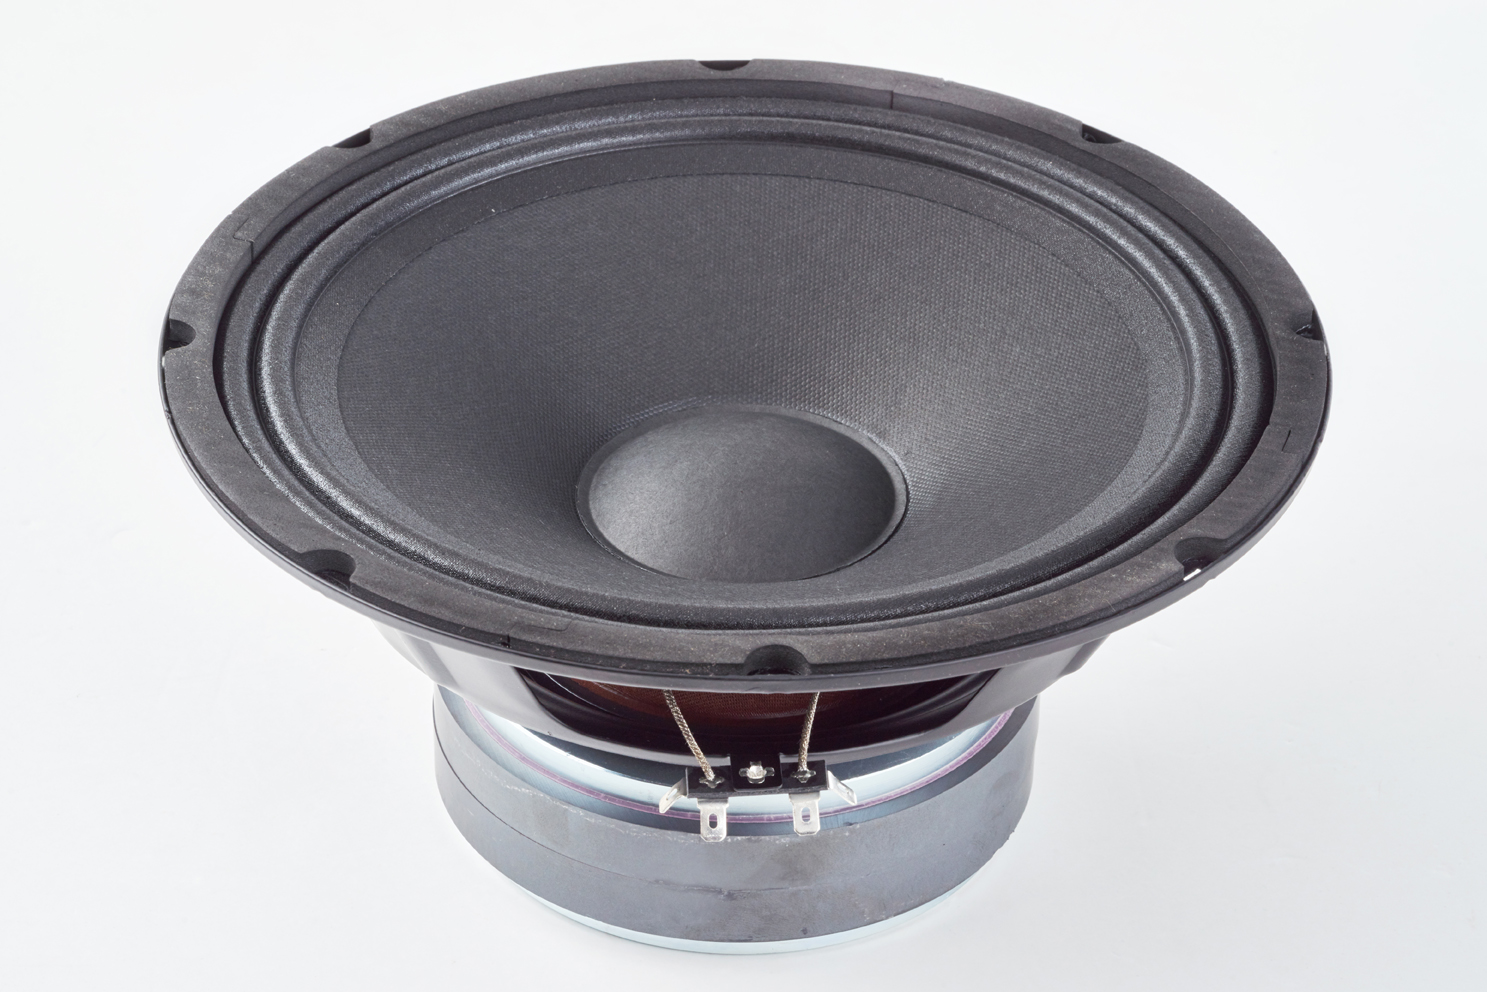 Warwick Amplification Parts - 10" Speaker / 100 W / 4 Ohm - for WCA 210-8 and WCA 410-4